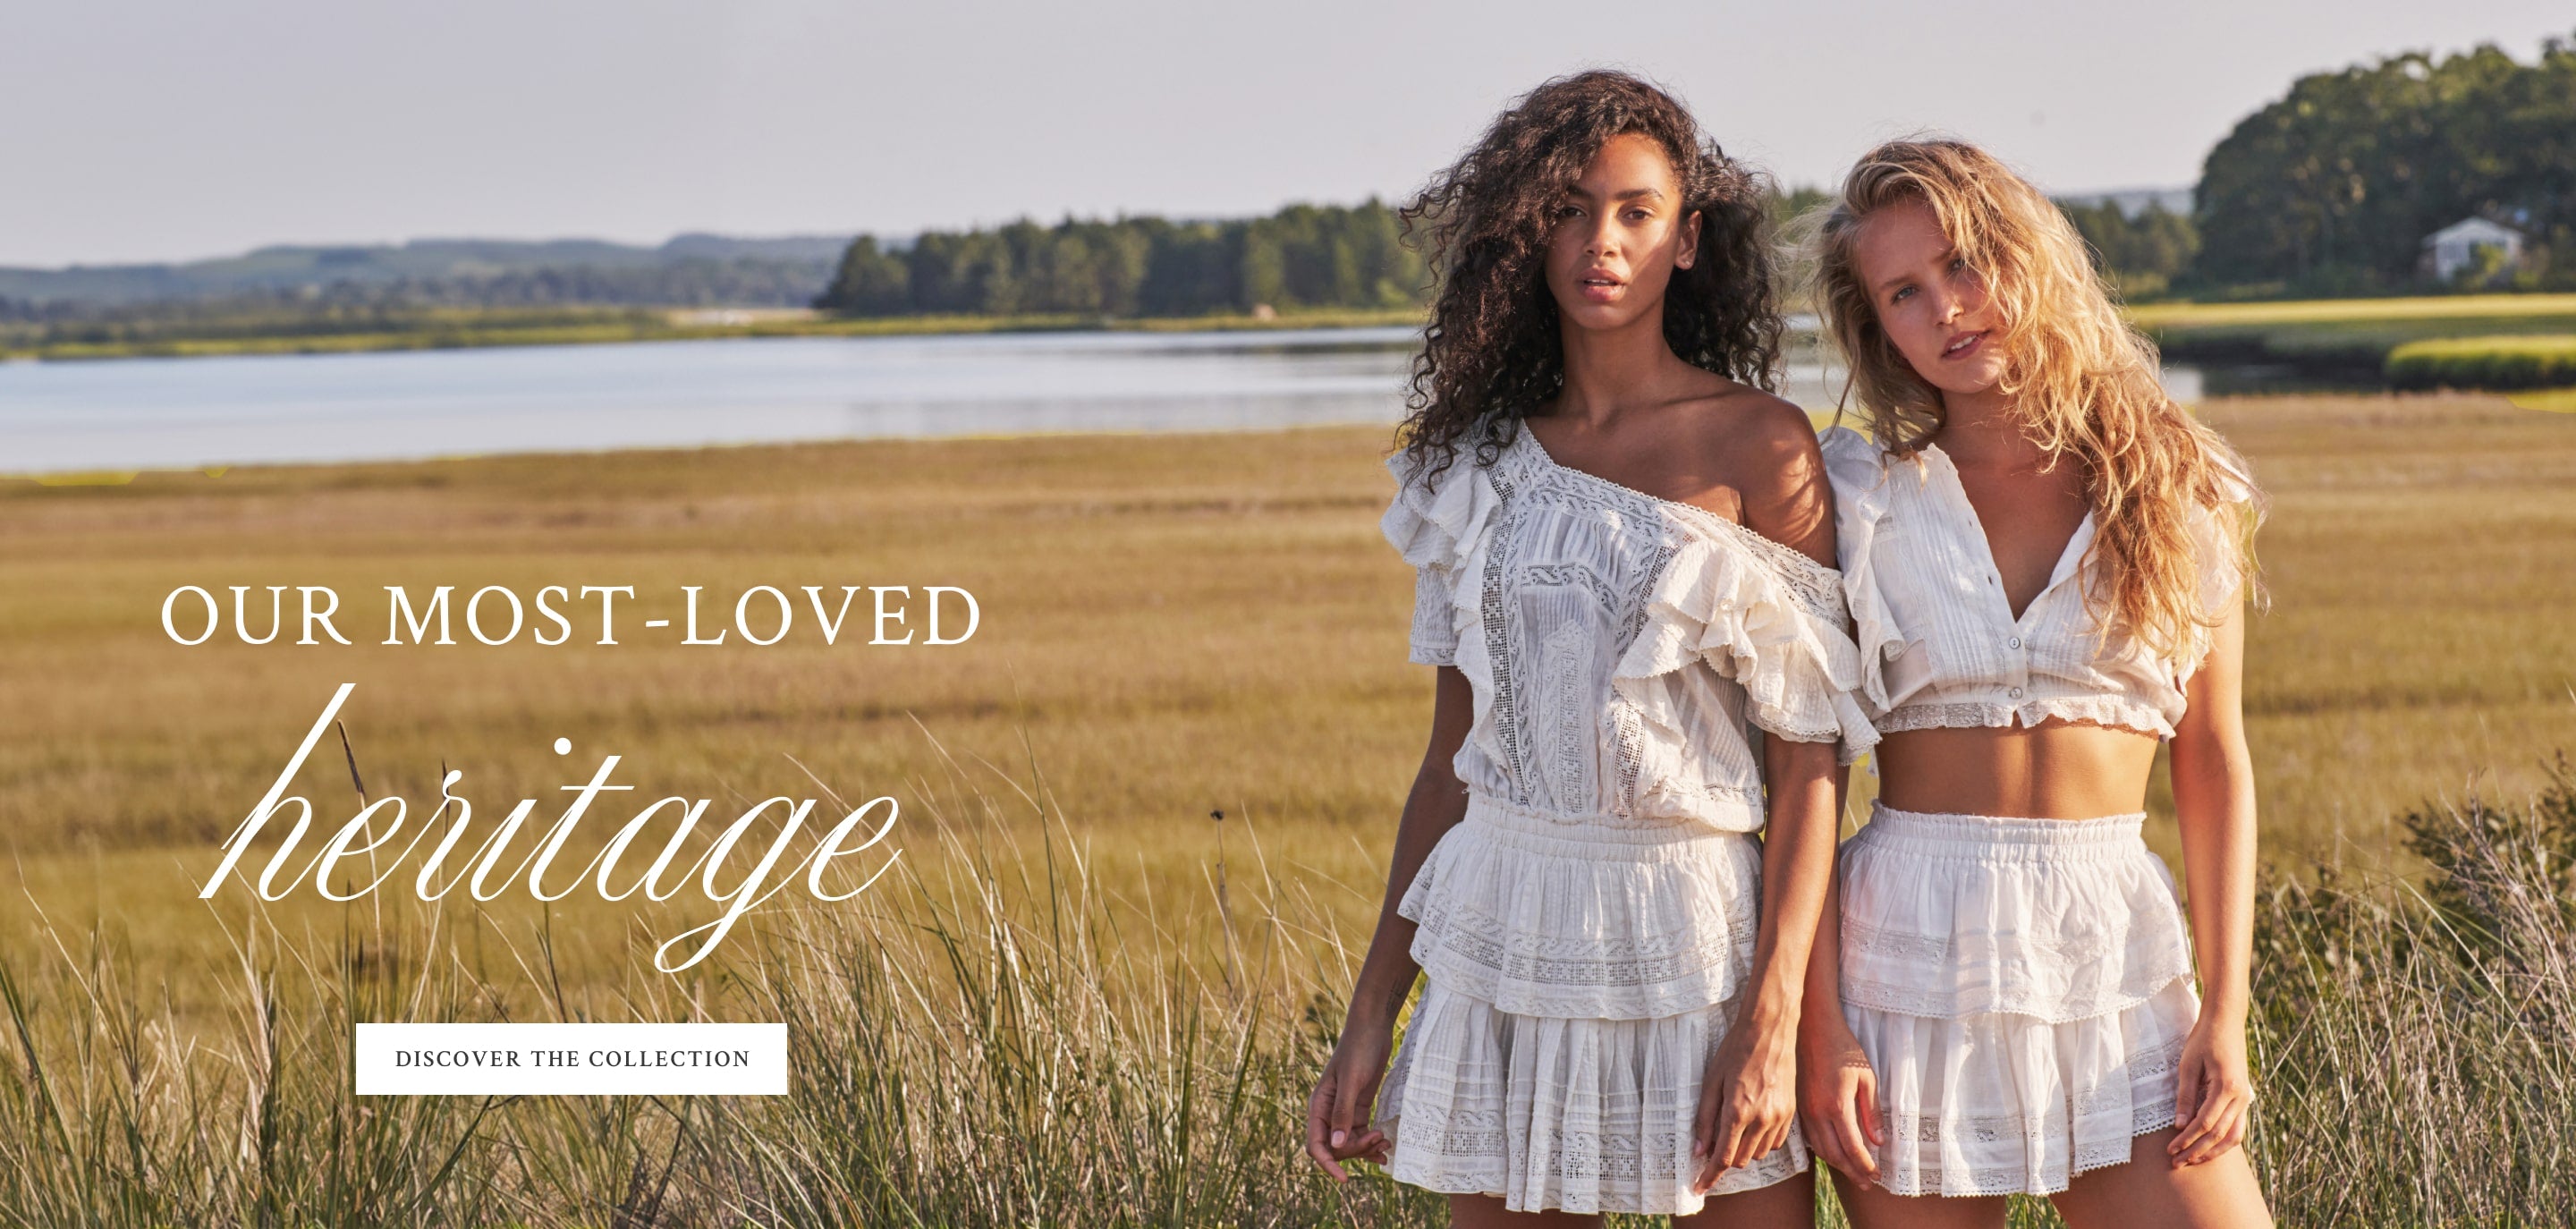 Discover our most-loved Heritage Collection